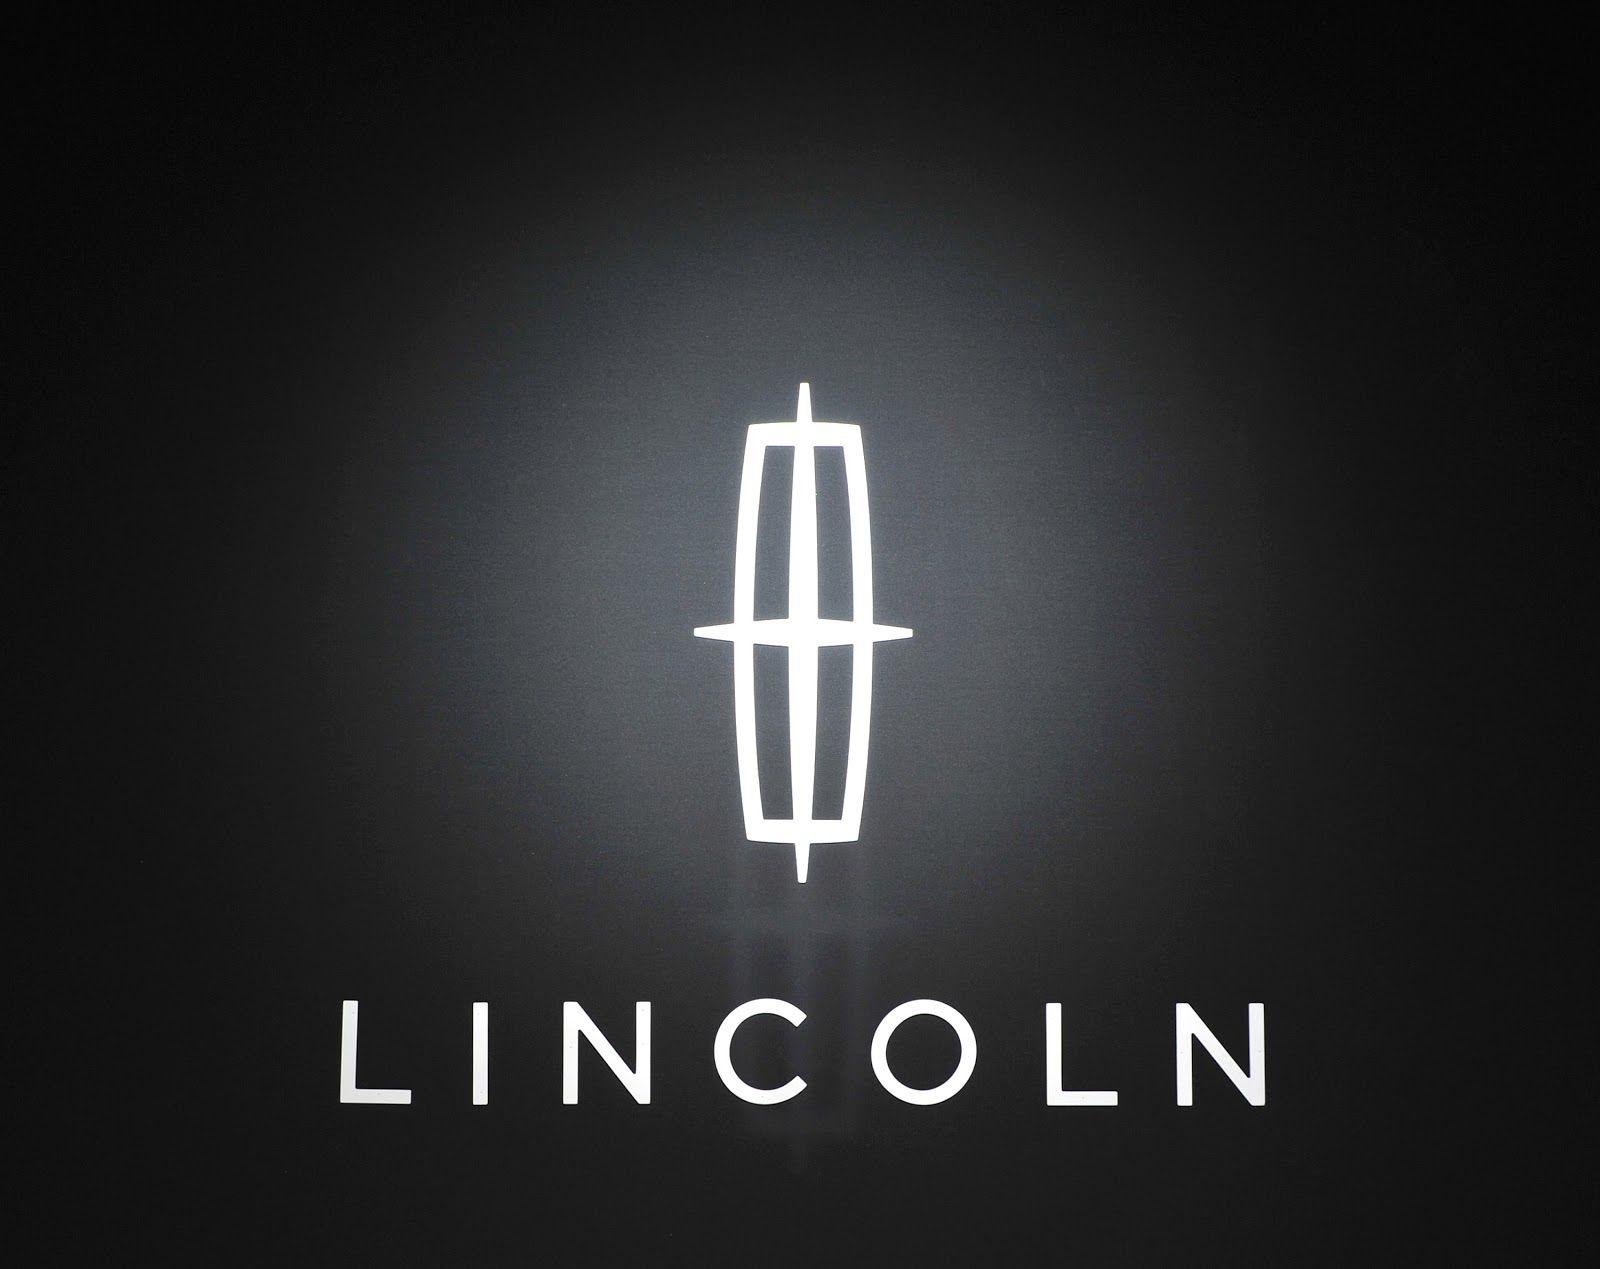 Lincoln Logo - Lincoln Logo, Lincoln Car Symbol Meaning and History. Car Brand